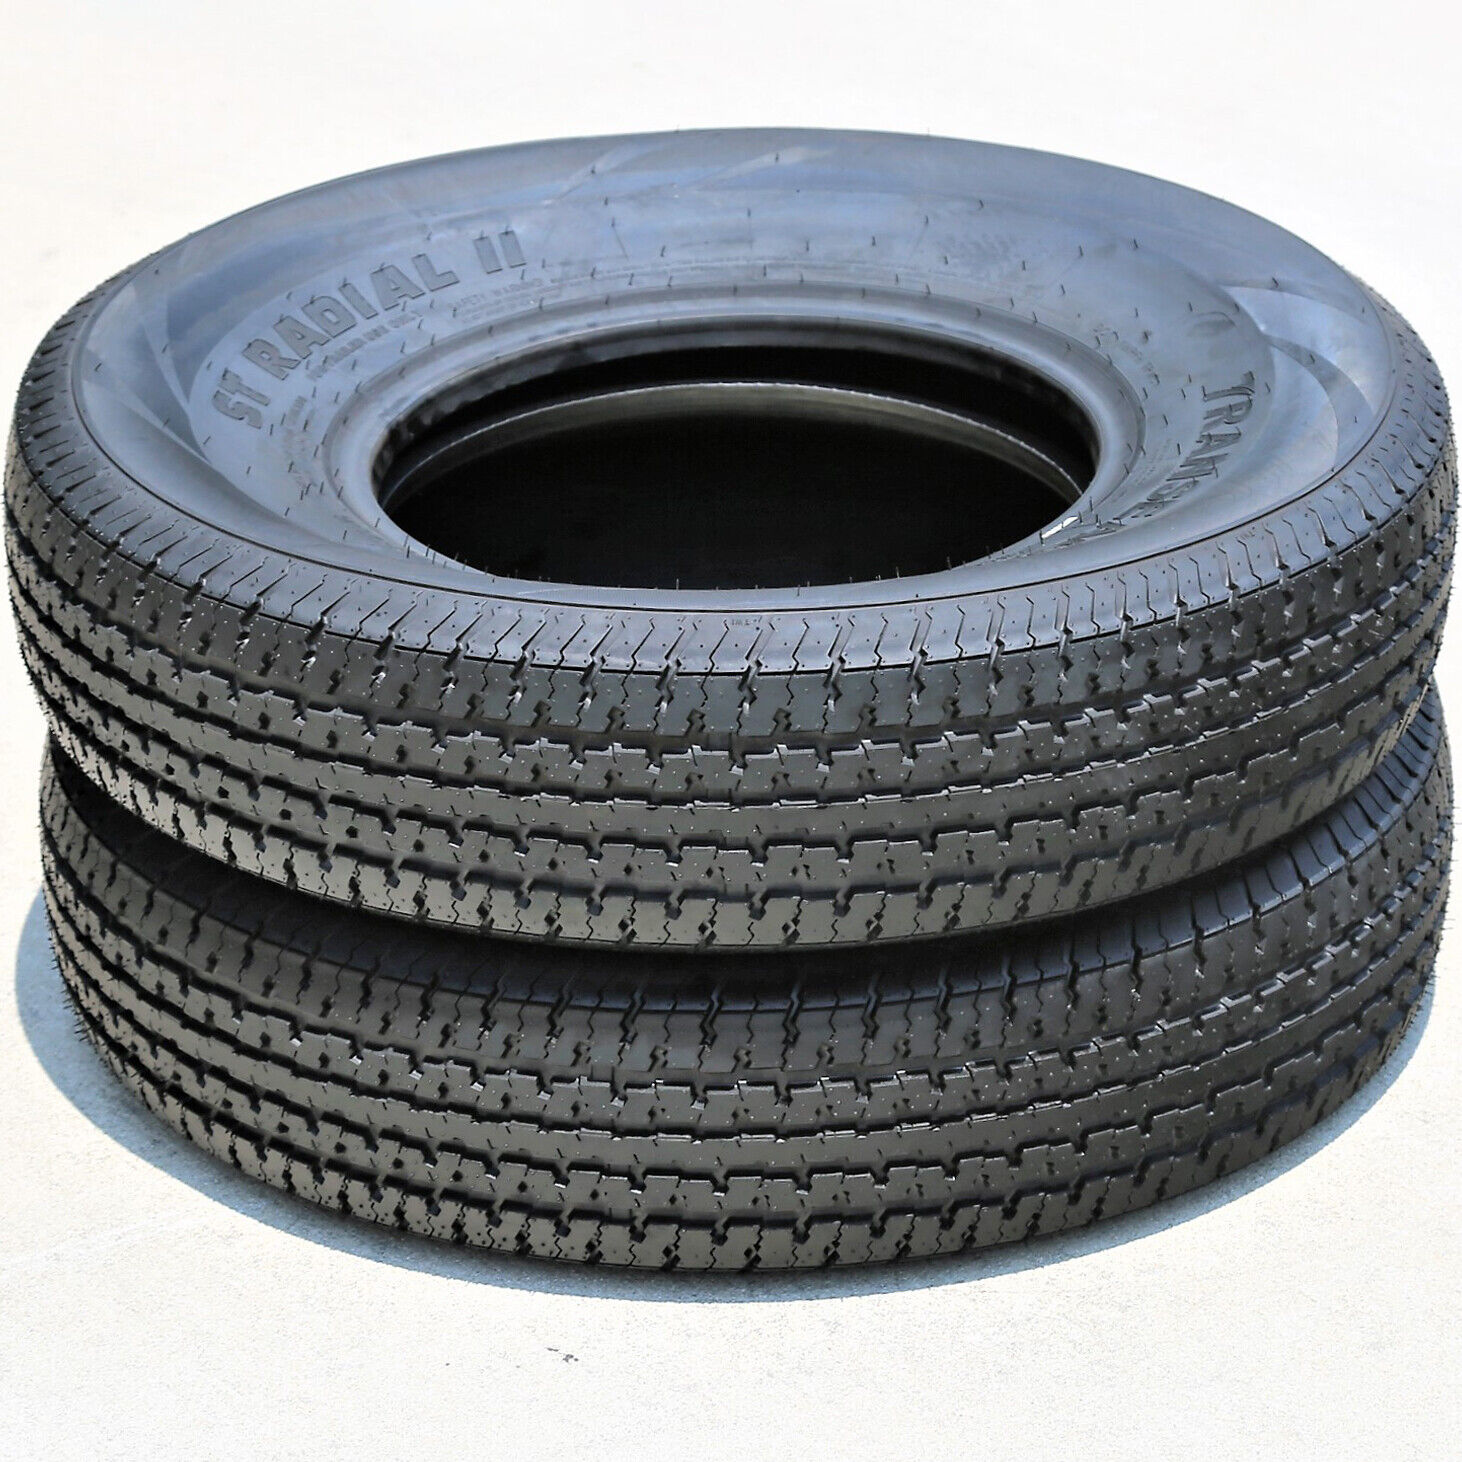 2 Tires Transeagle ST Radial II Steel Belted ST 225/75R15 Load E 10 Ply Trailer